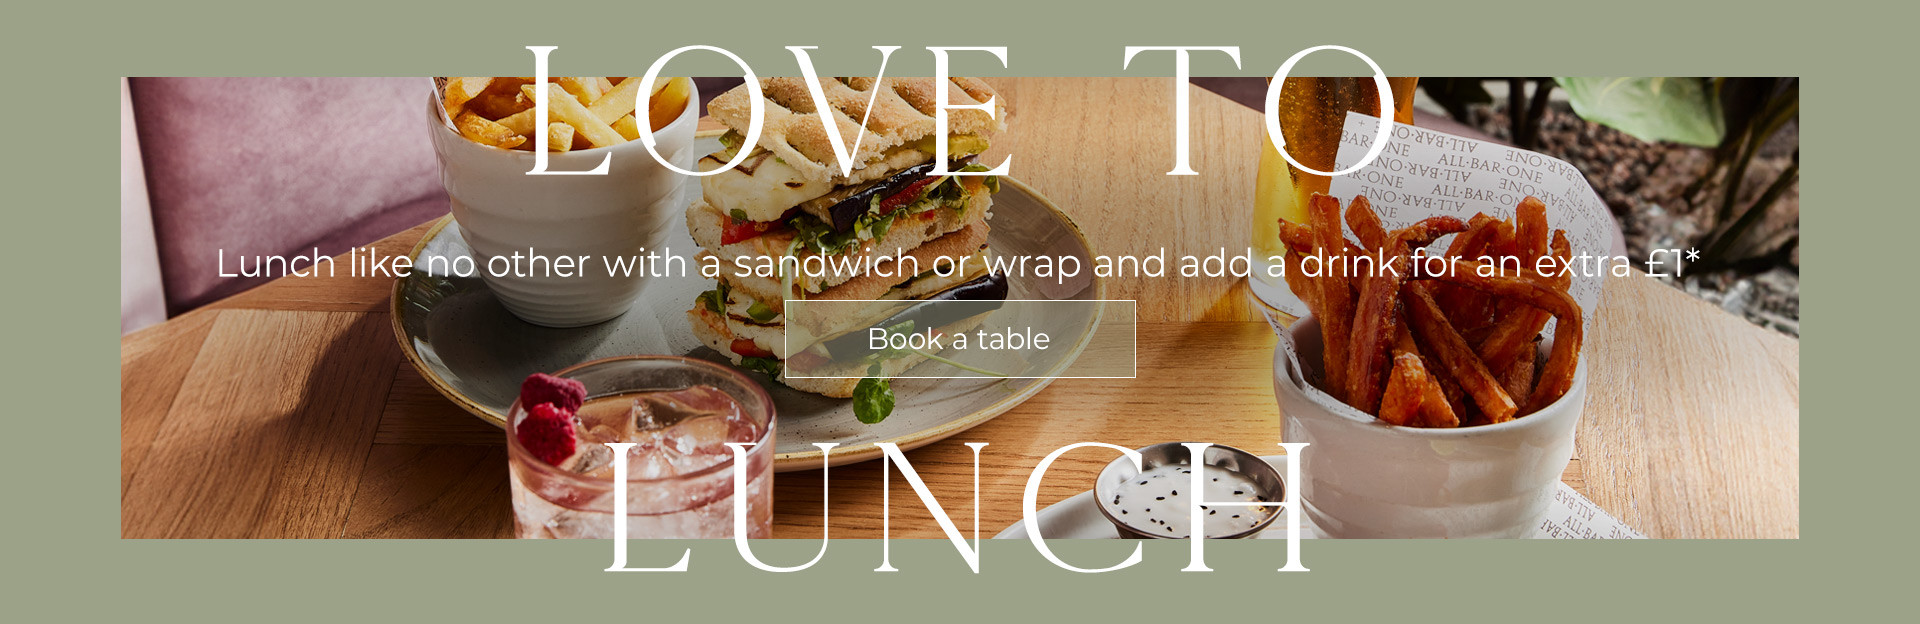 Lunch Offer at All Bar One Manchester